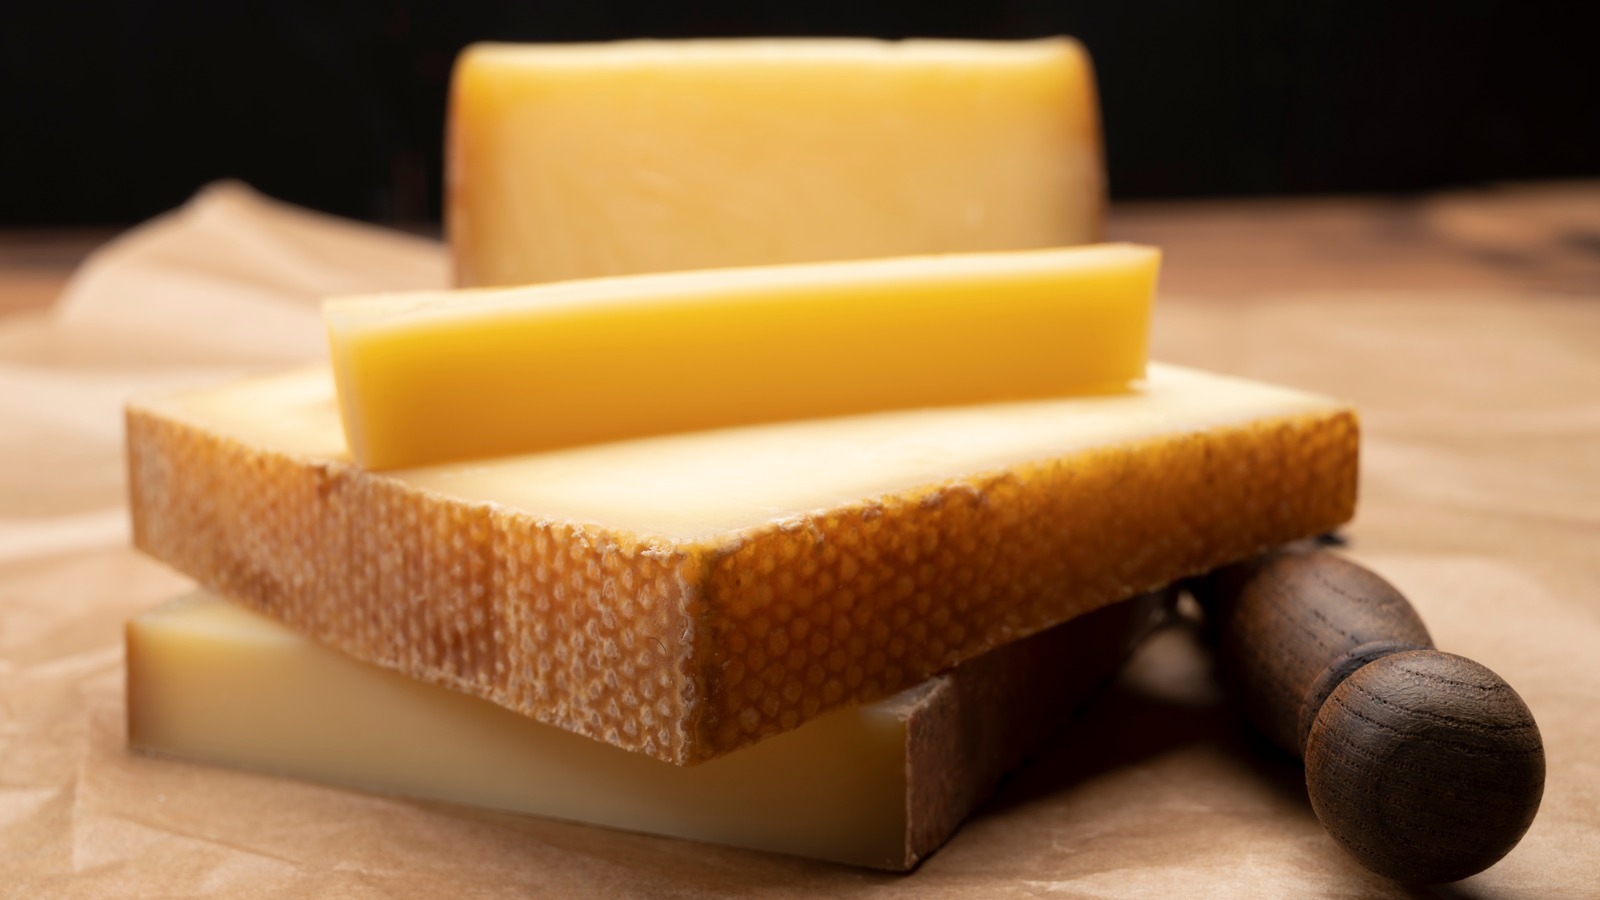 Best Gruyere Cheese Substitute (17 Amazingly Tasty Alternatives To